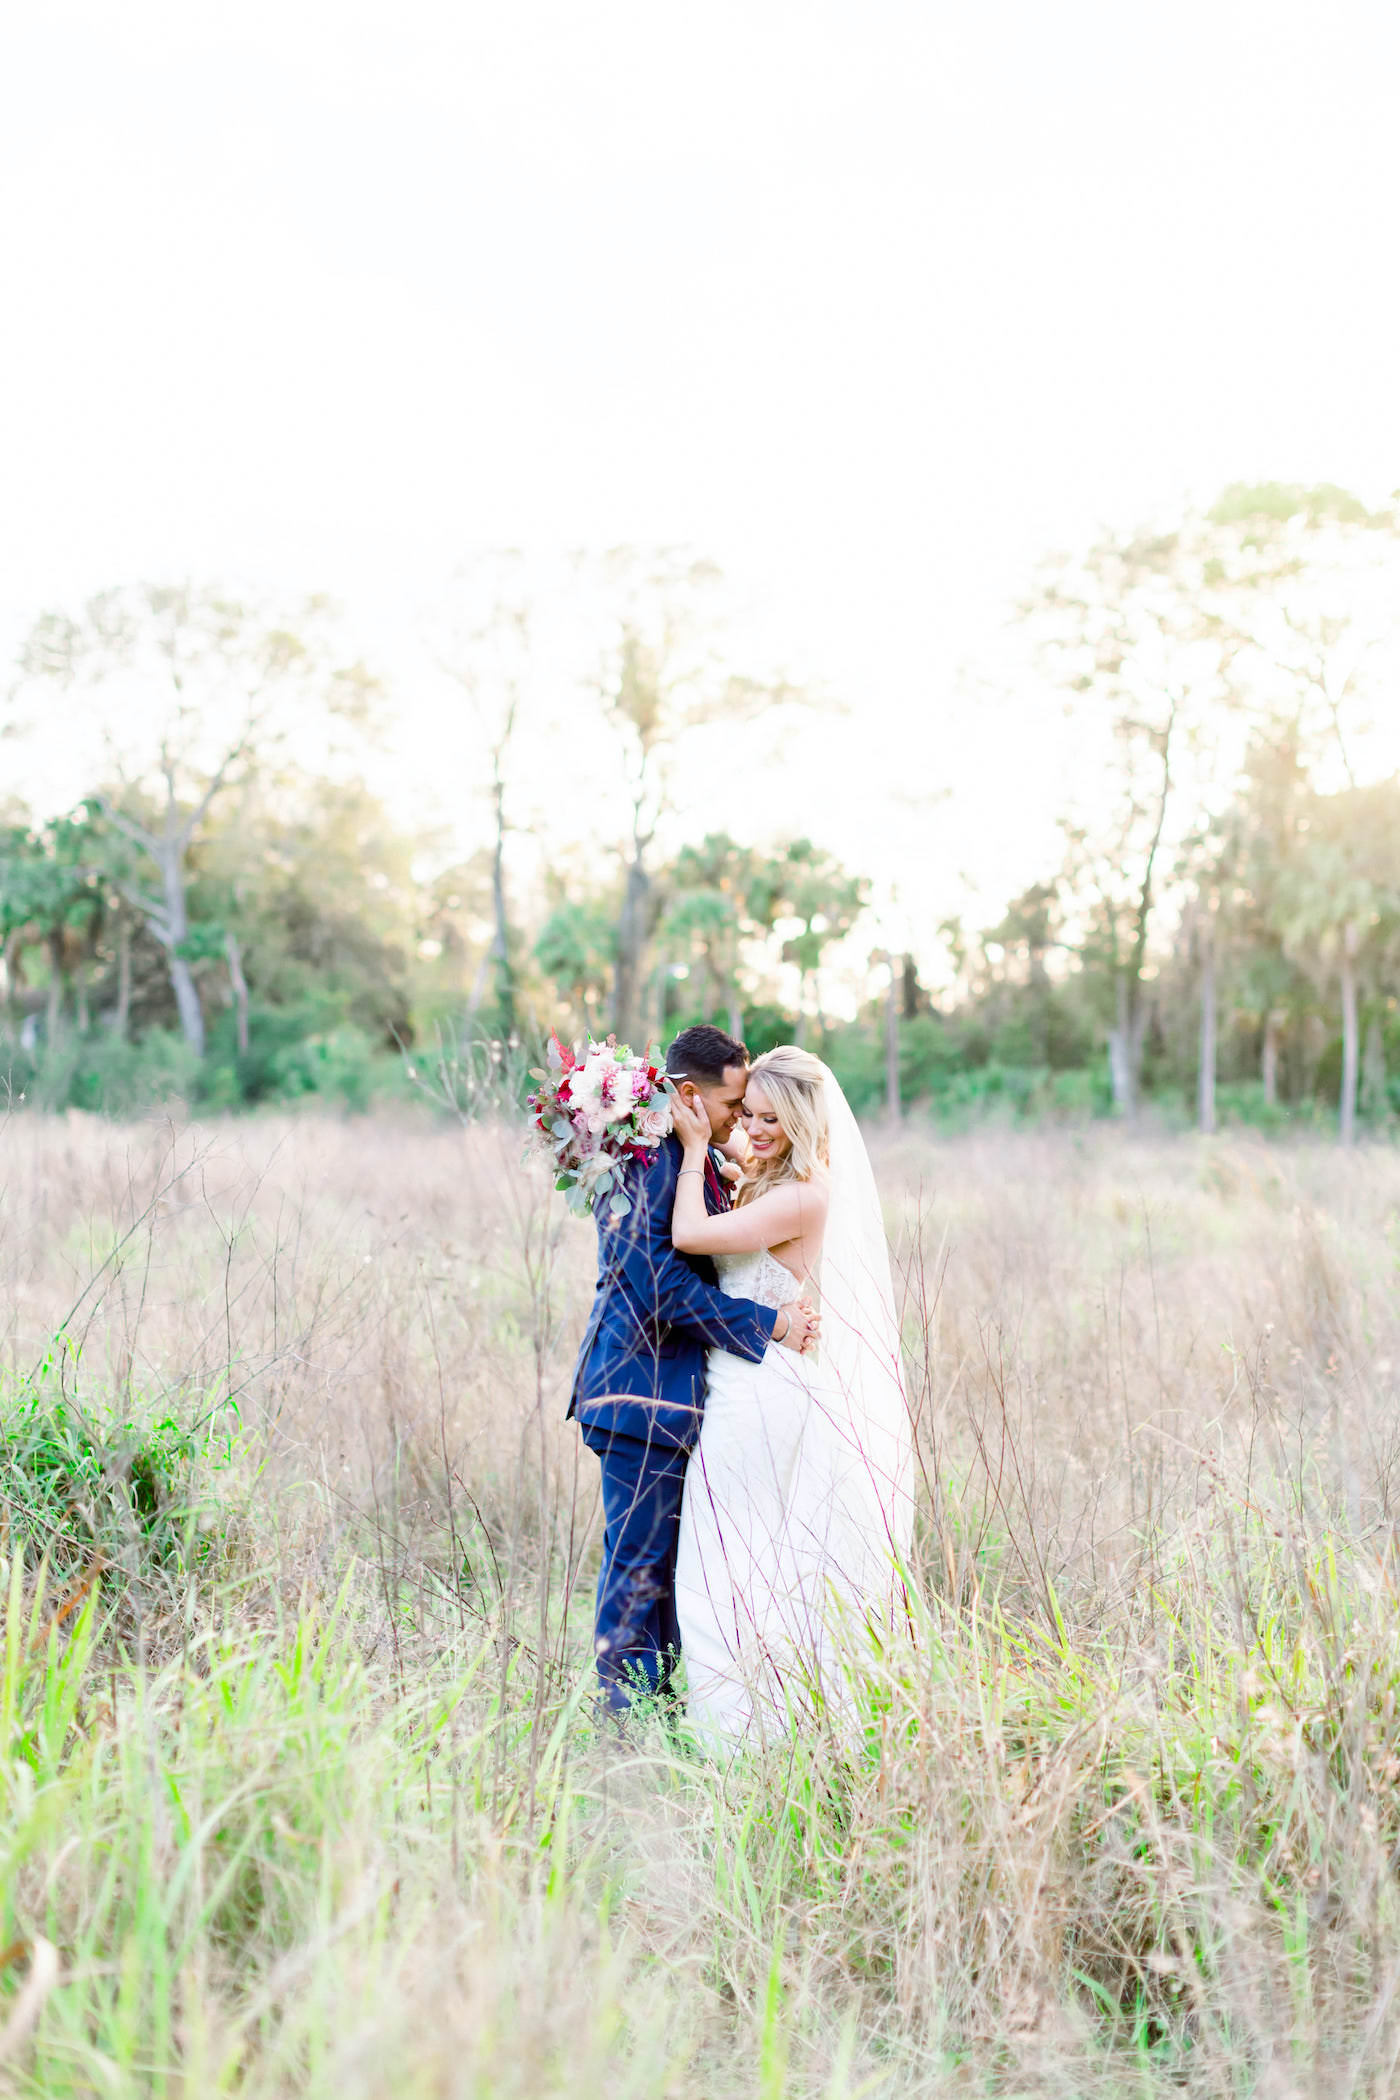 Bride and Groom Outdoor Field Portrait | Shauna and Jordon Photography